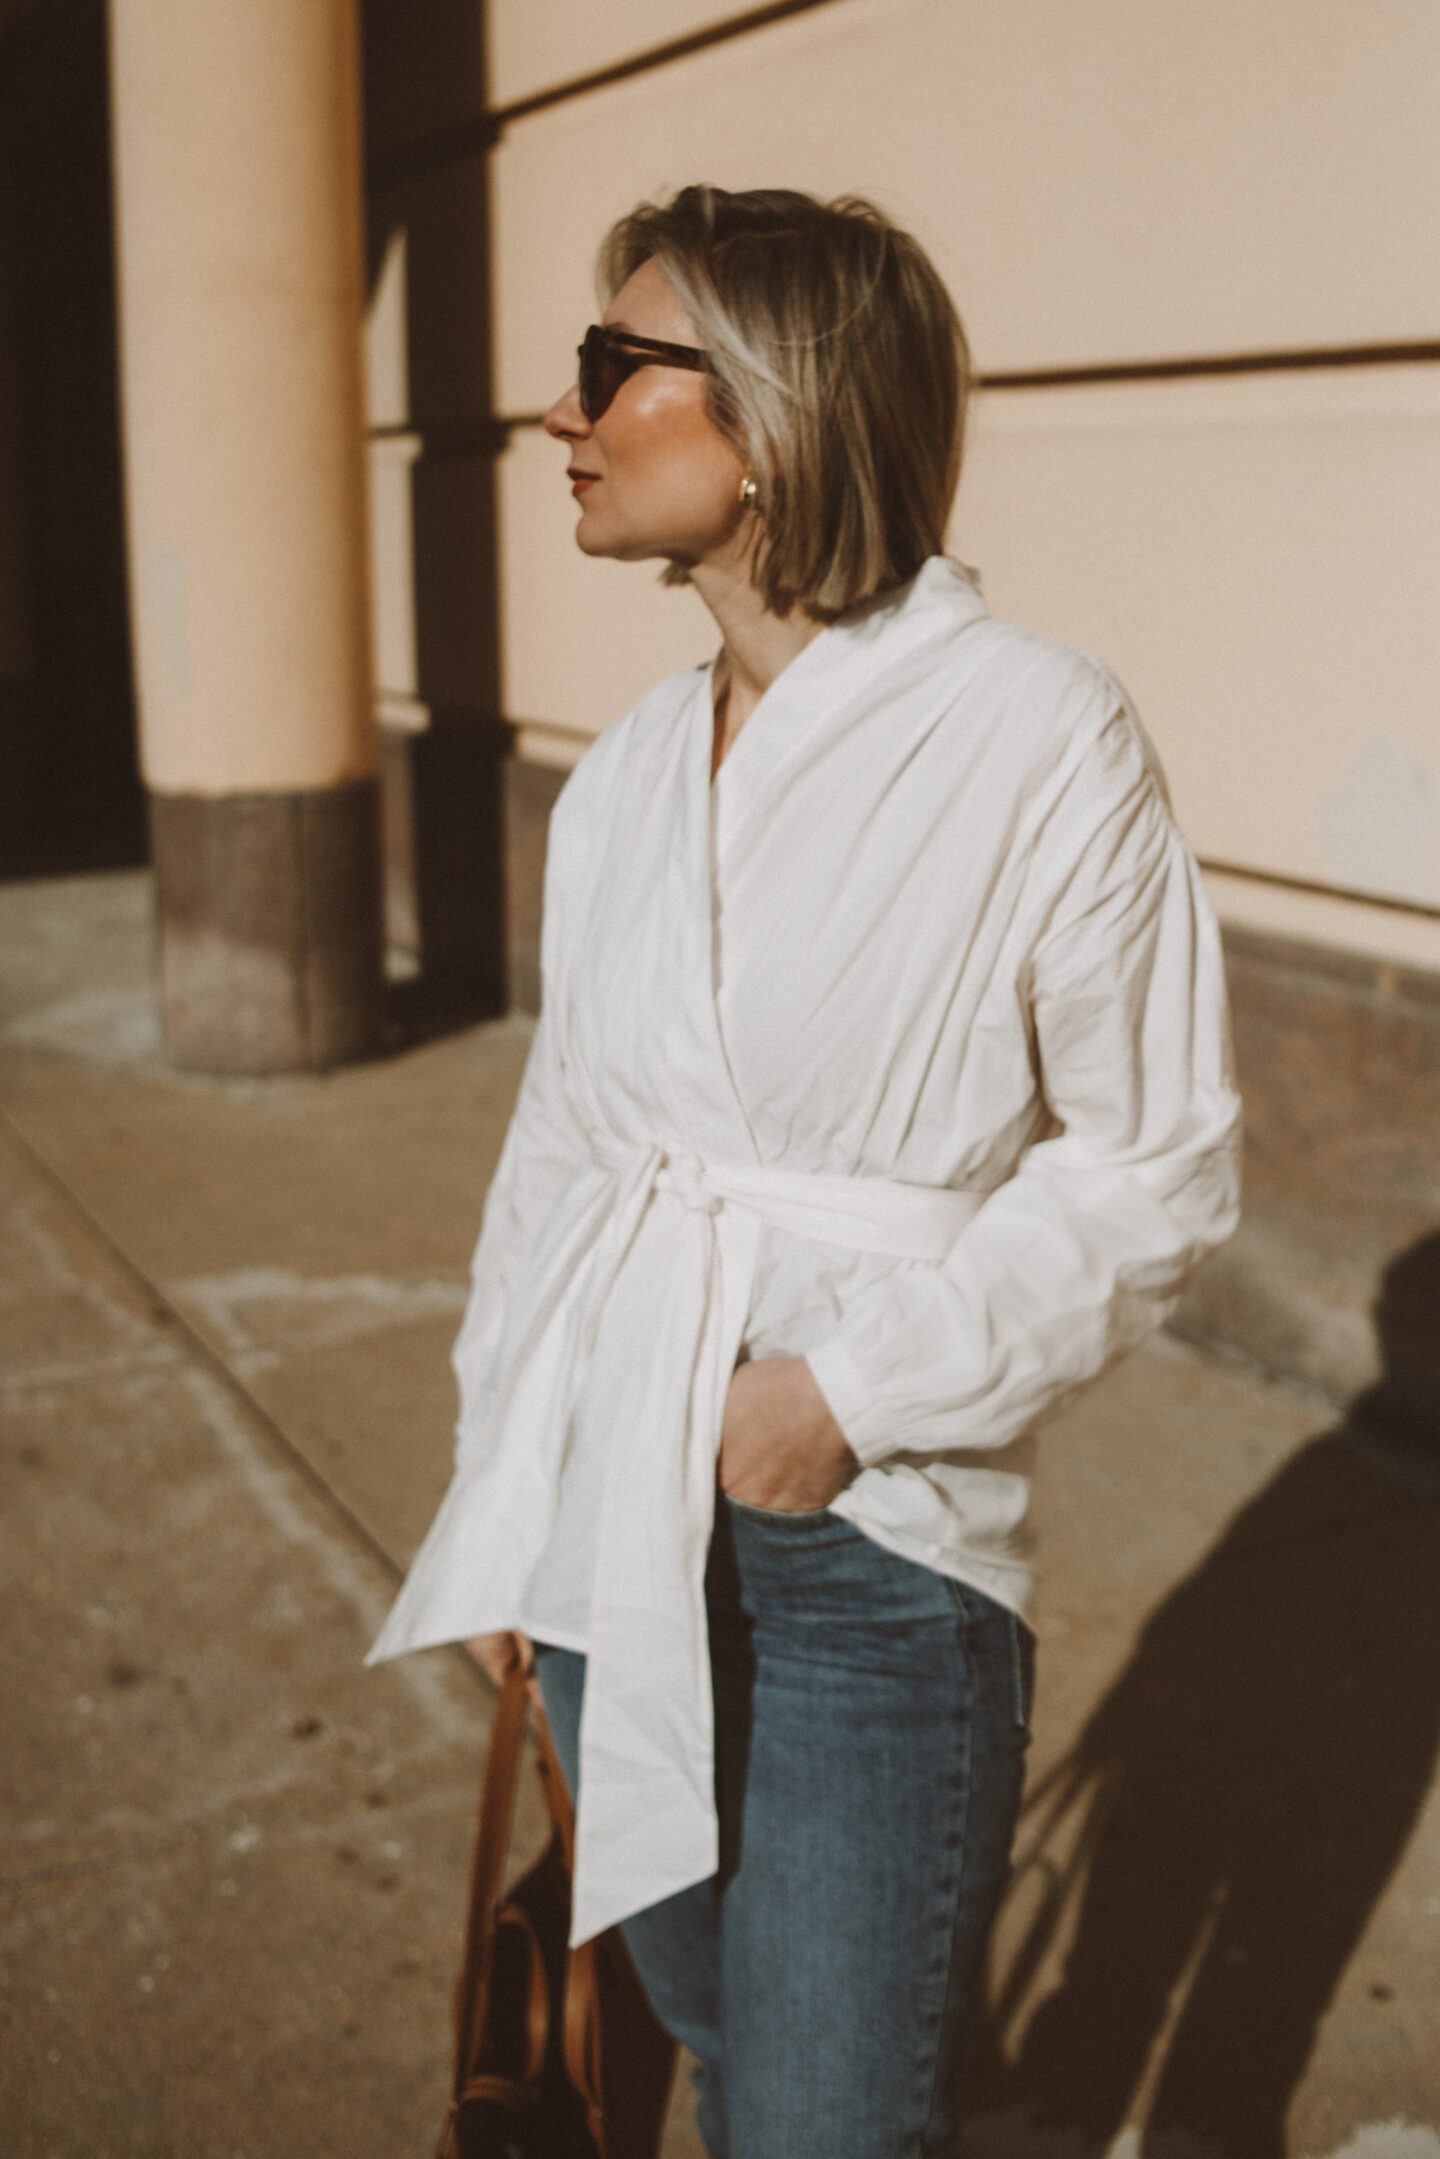 Karin Emily wears a white cotton wrap blouse with a pair of classic tortoiseshell sunglasses nd blue jeans